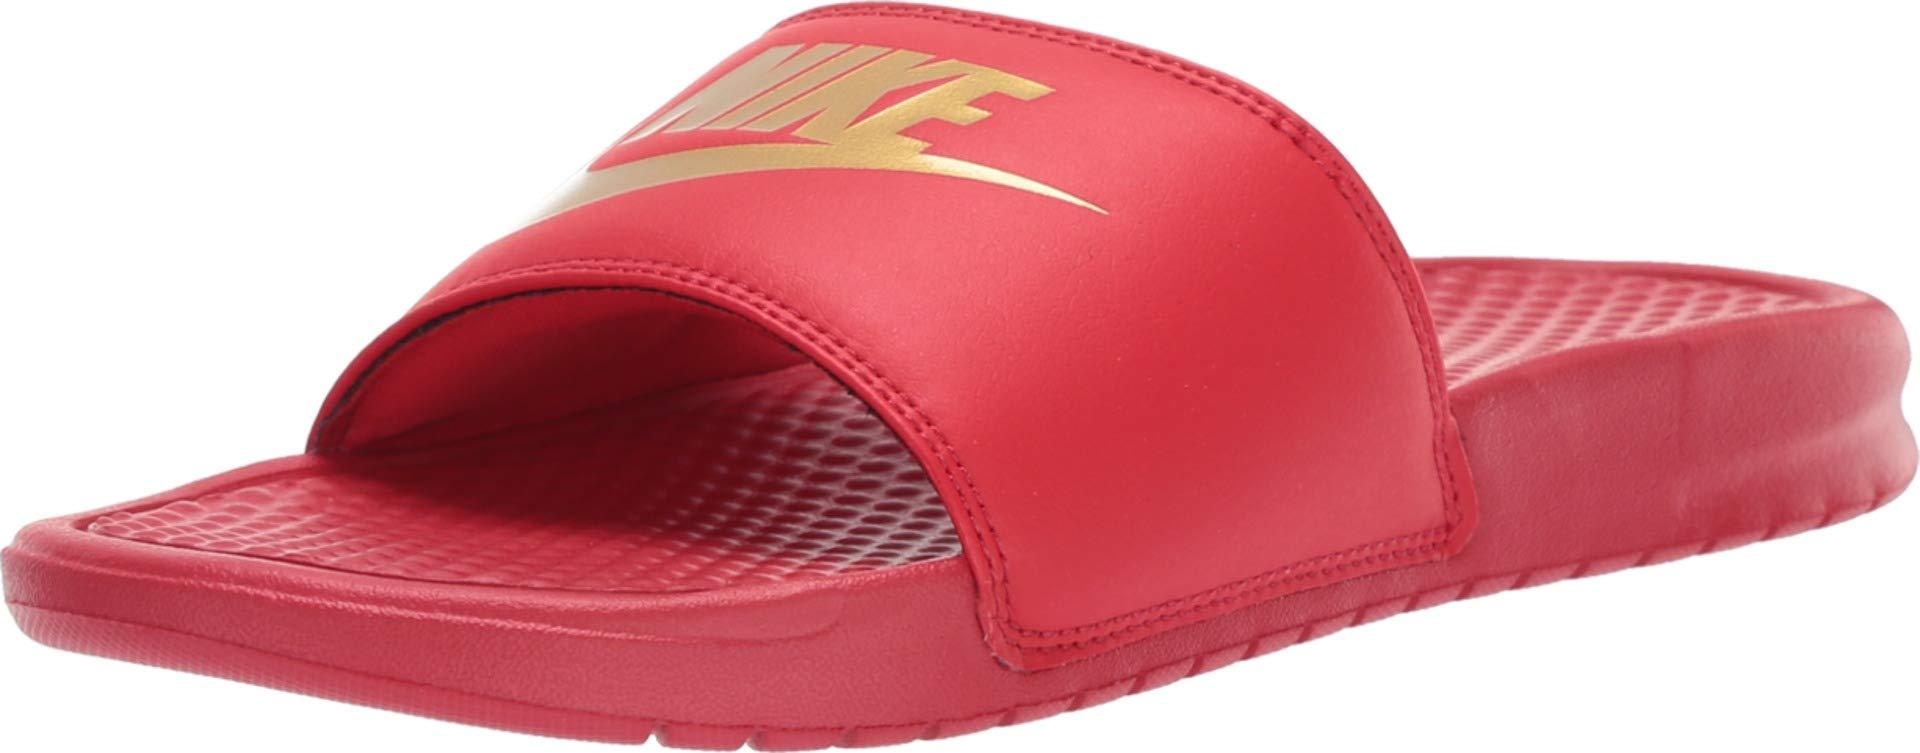 nike slides red and gold